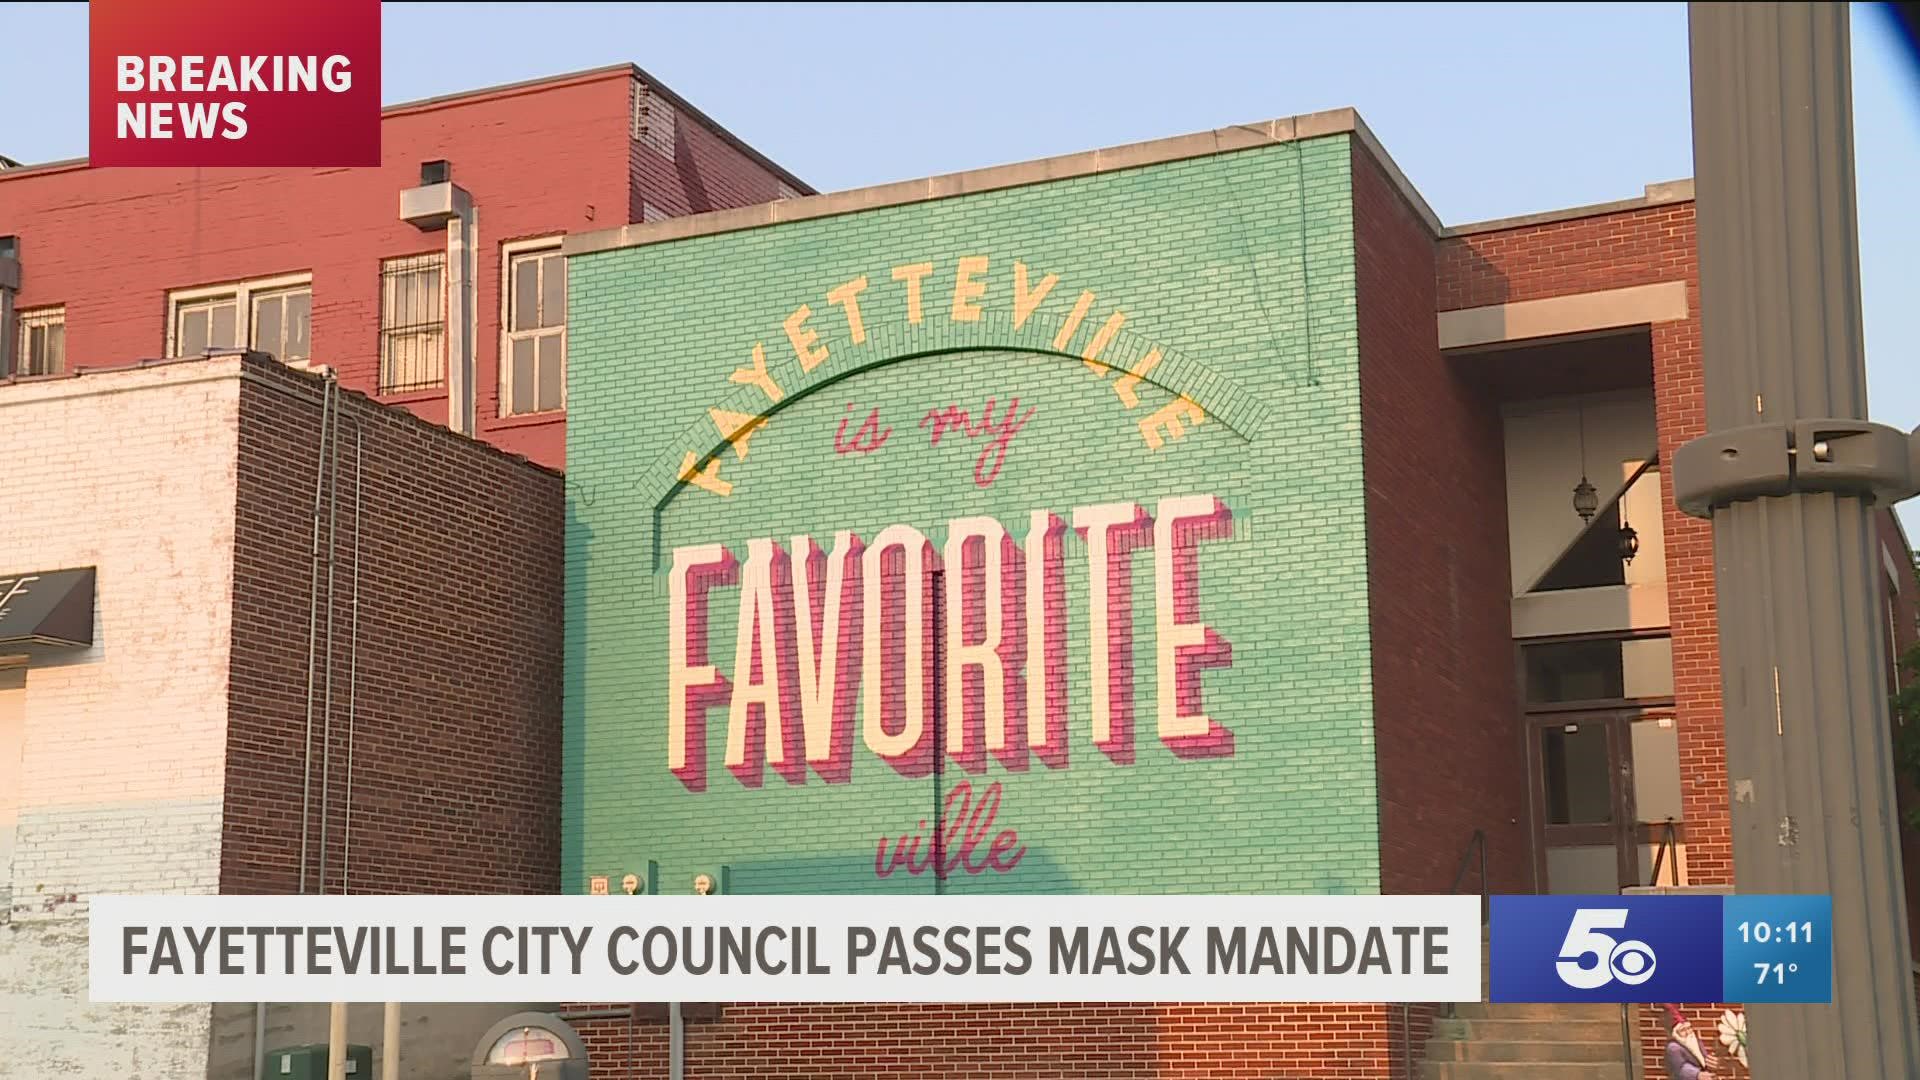 The council approved the mandate with a 7 to 0 vote Friday, August 6.